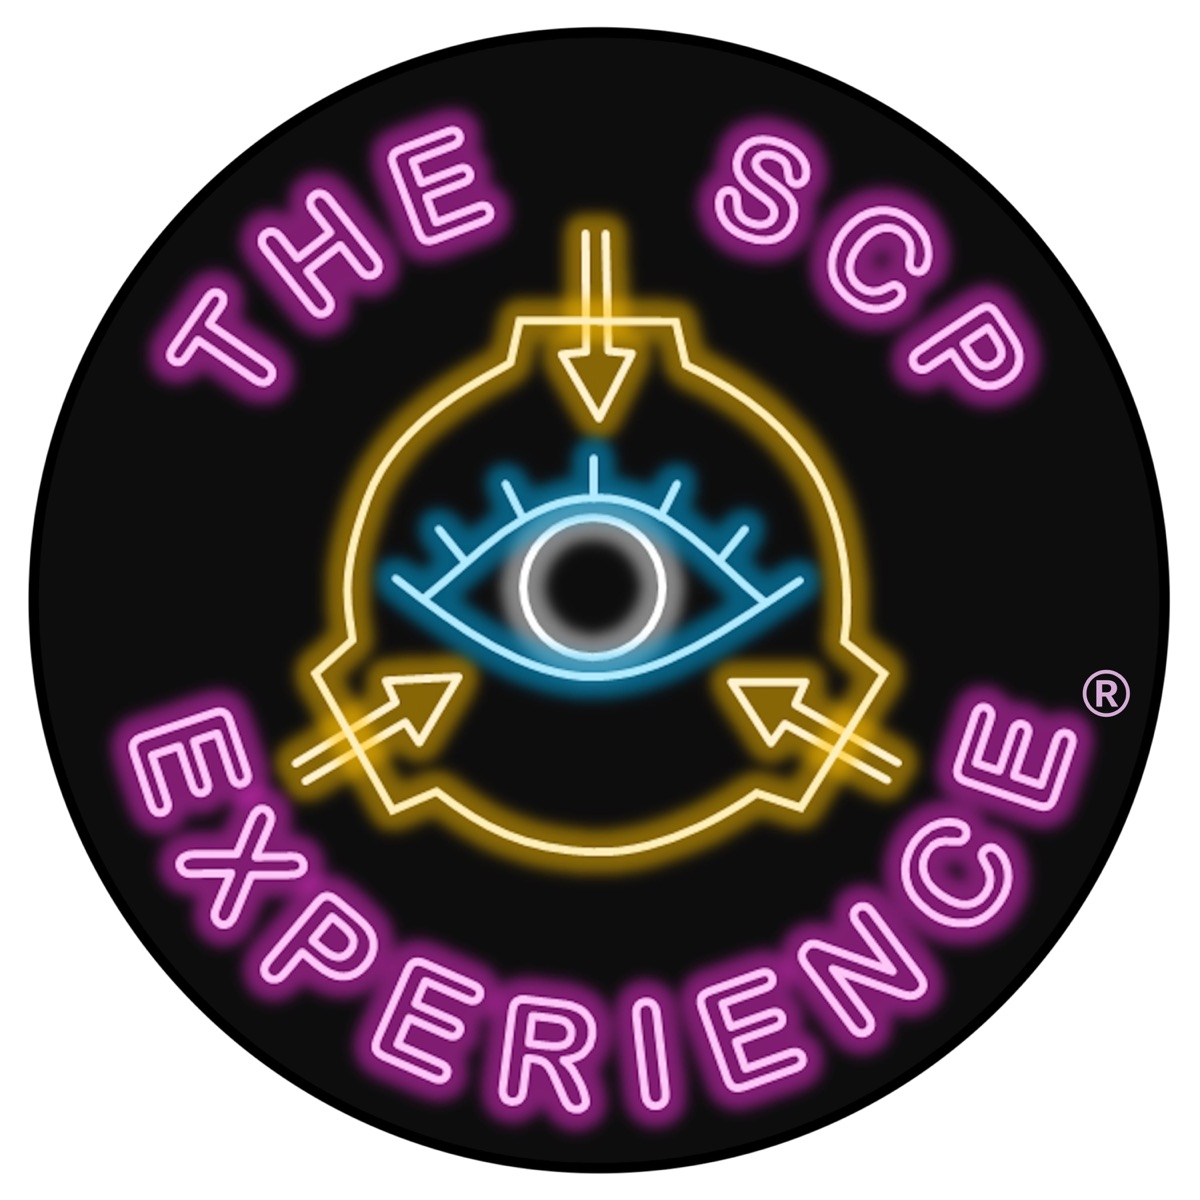 666 scp  Discover